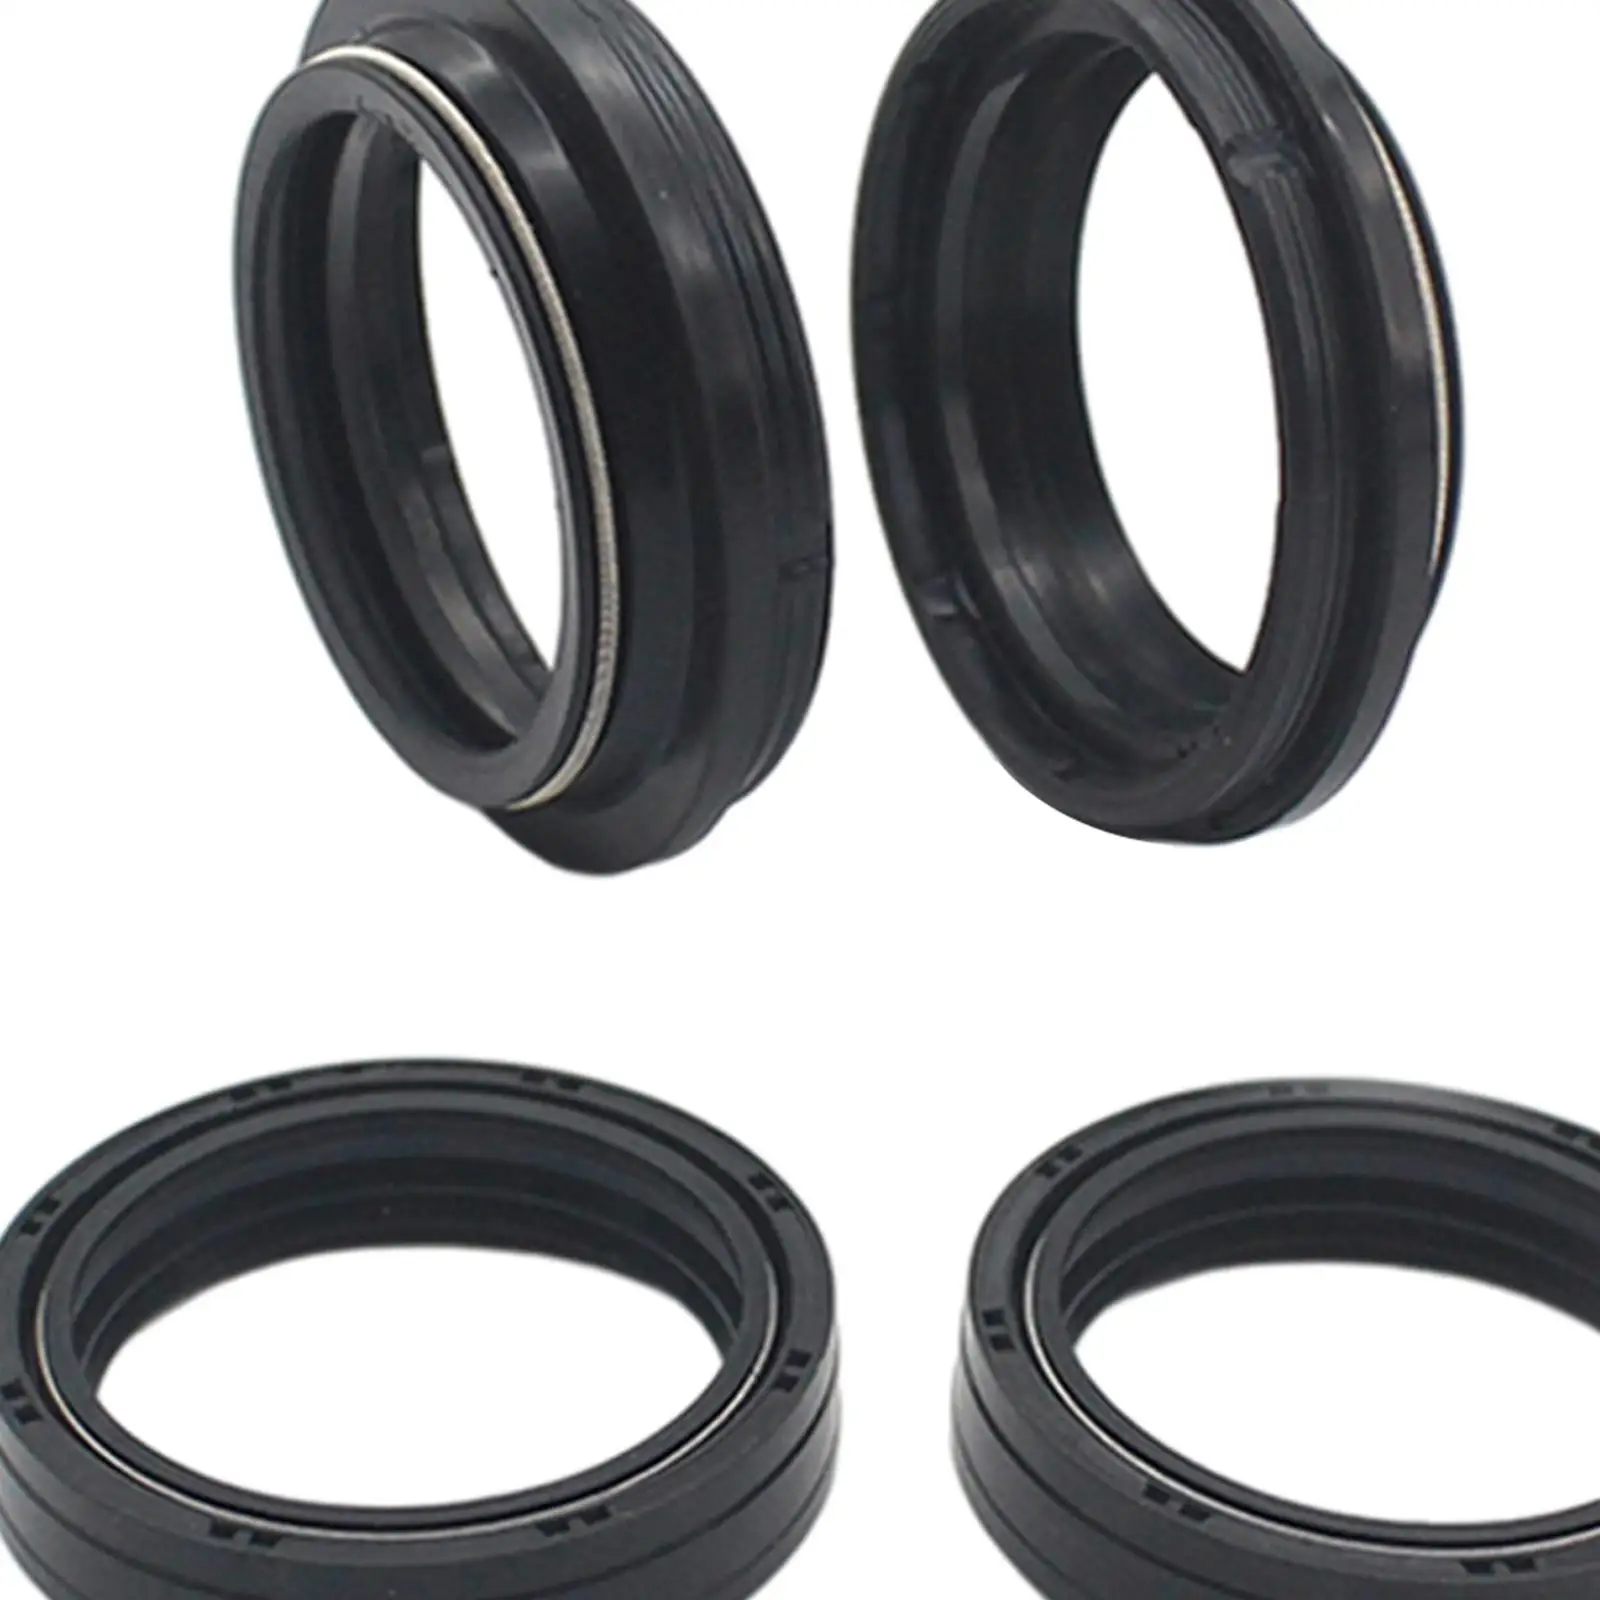 Fork and Dust Seal Kit Replaces Motorcycle Dust Wiper Kit for R1200GS 2004-2012 for BMW